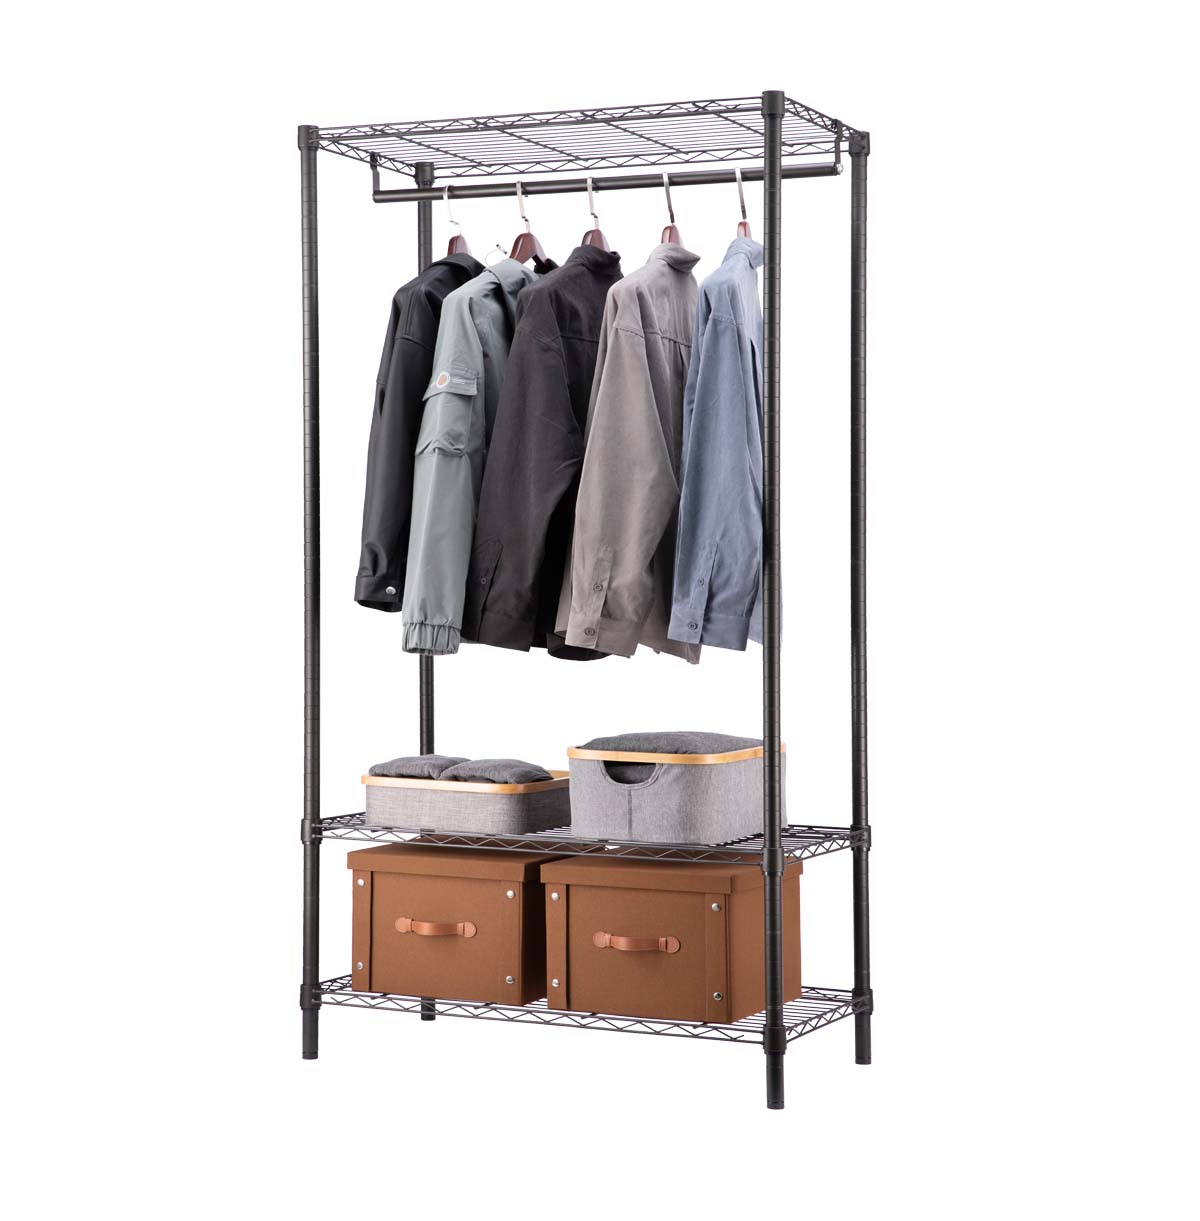 Heavy Duty Wire Garment Rack, Metal Clothing Rack with Hanging Rods / Freestanding Open Wardrobe Org